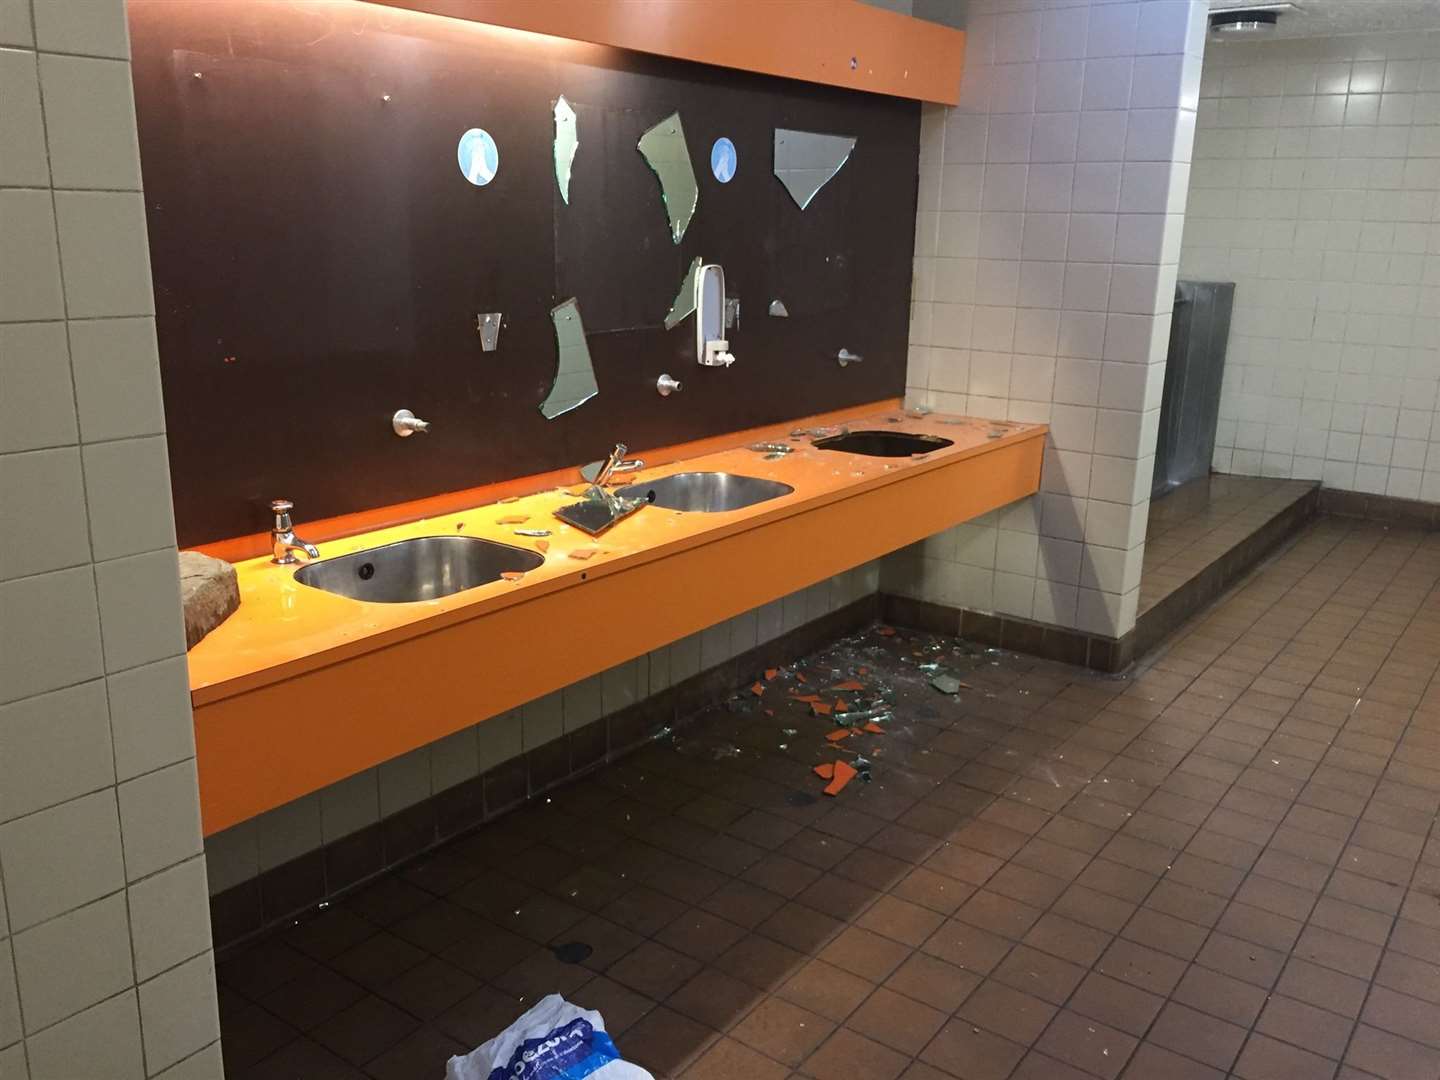 This photograph led to hundreds of angry comments on social media when posted on Monday. It shows all the mirrors smashed to pieces at the public toilets in the Whitechapel area of Wick. A brick can be seen on the left side.